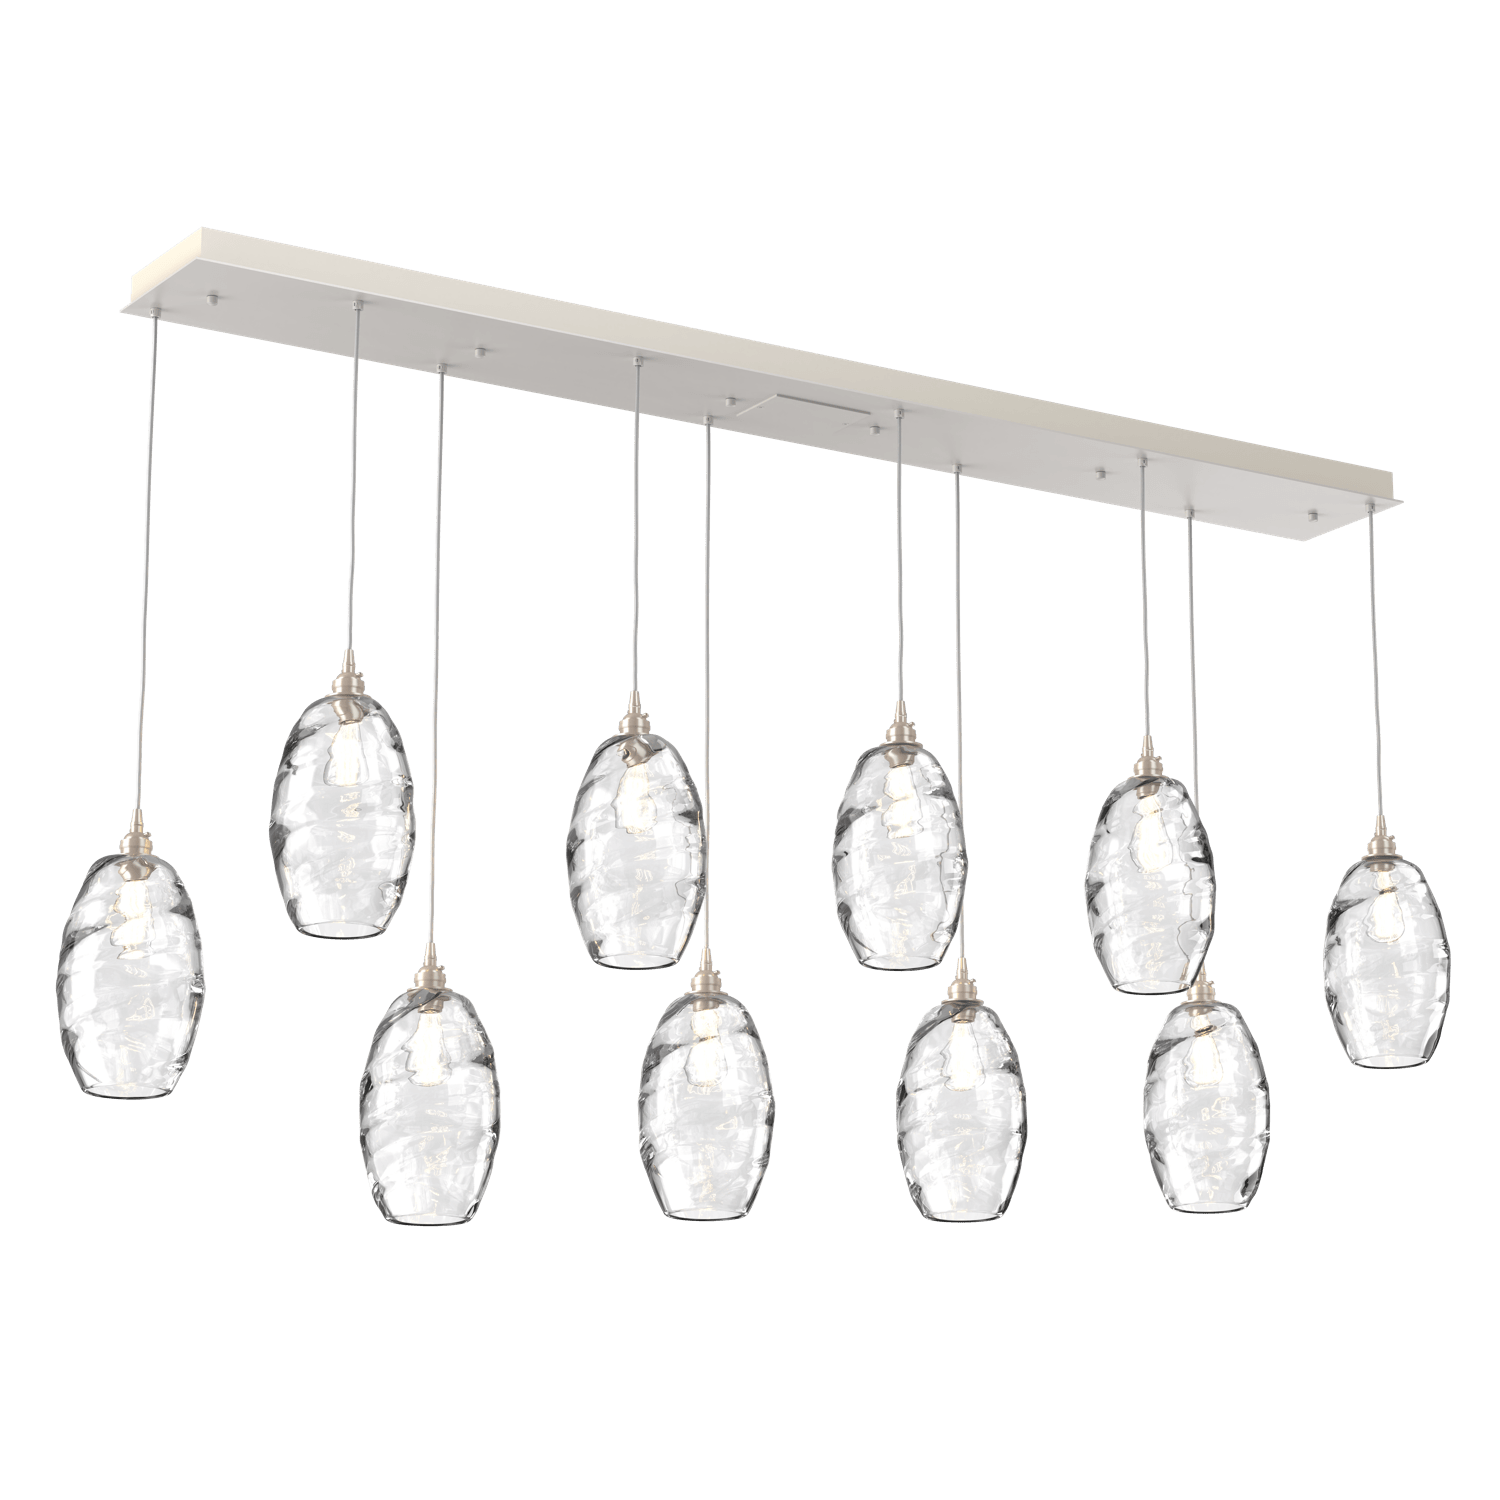 PLB0035-10-BS-OC-Hammerton-Studio-Optic-Blown-Glass-Elisse-10-light-linear-pendant-chandelier-with-metallic-beige-silver-finish-and-optic-clear-blown-glass-shades-and-incandescent-lamping